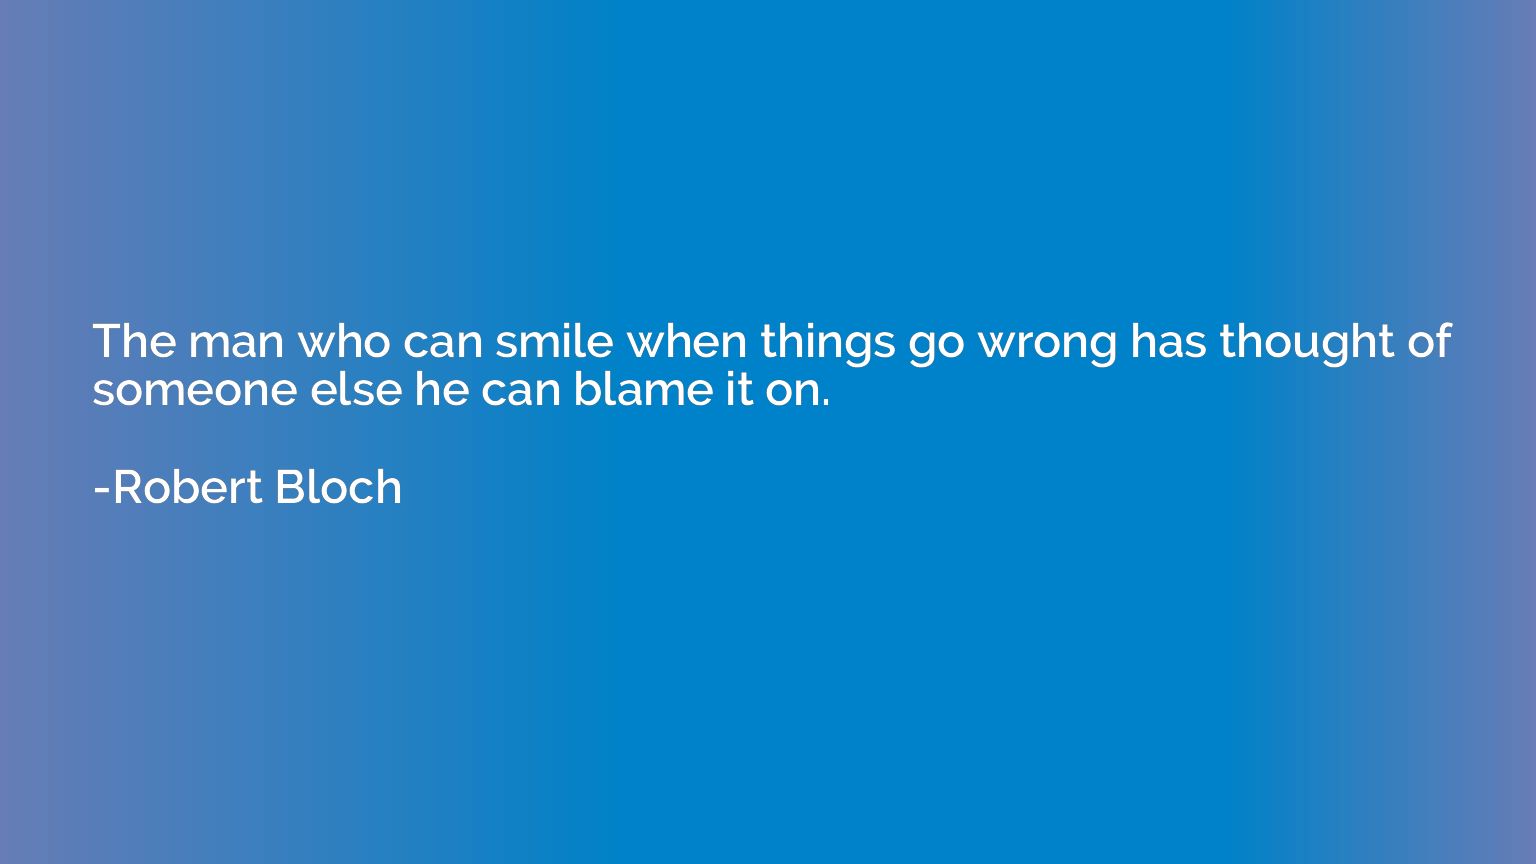 The man who can smile when things go wrong has thought of so